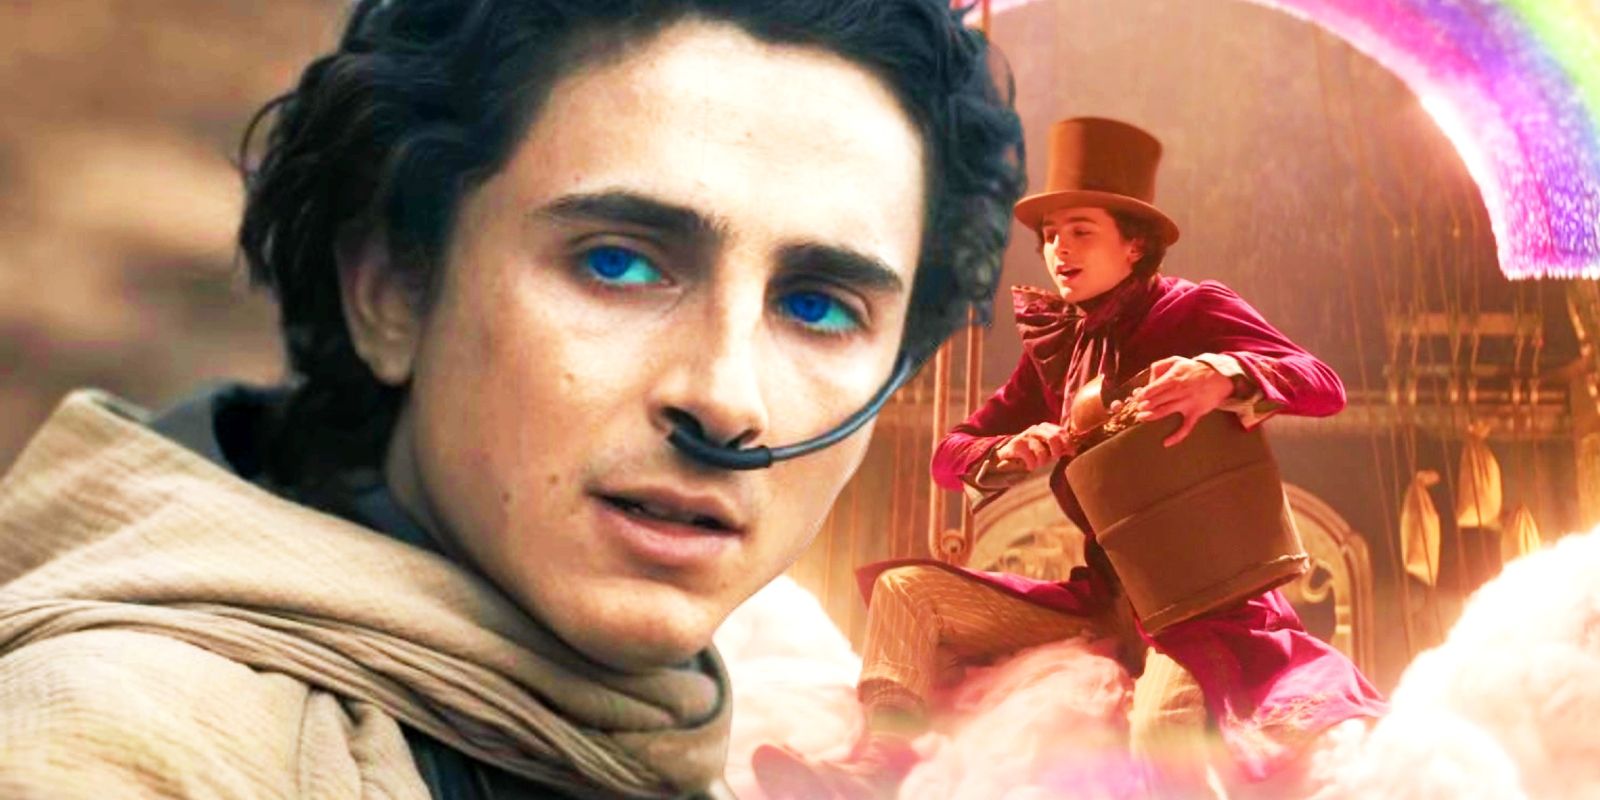 timothee-chalamet’s-wonka-&-dune-2-success-breaks-45-year-old-record-previously-held-by-john-travolta